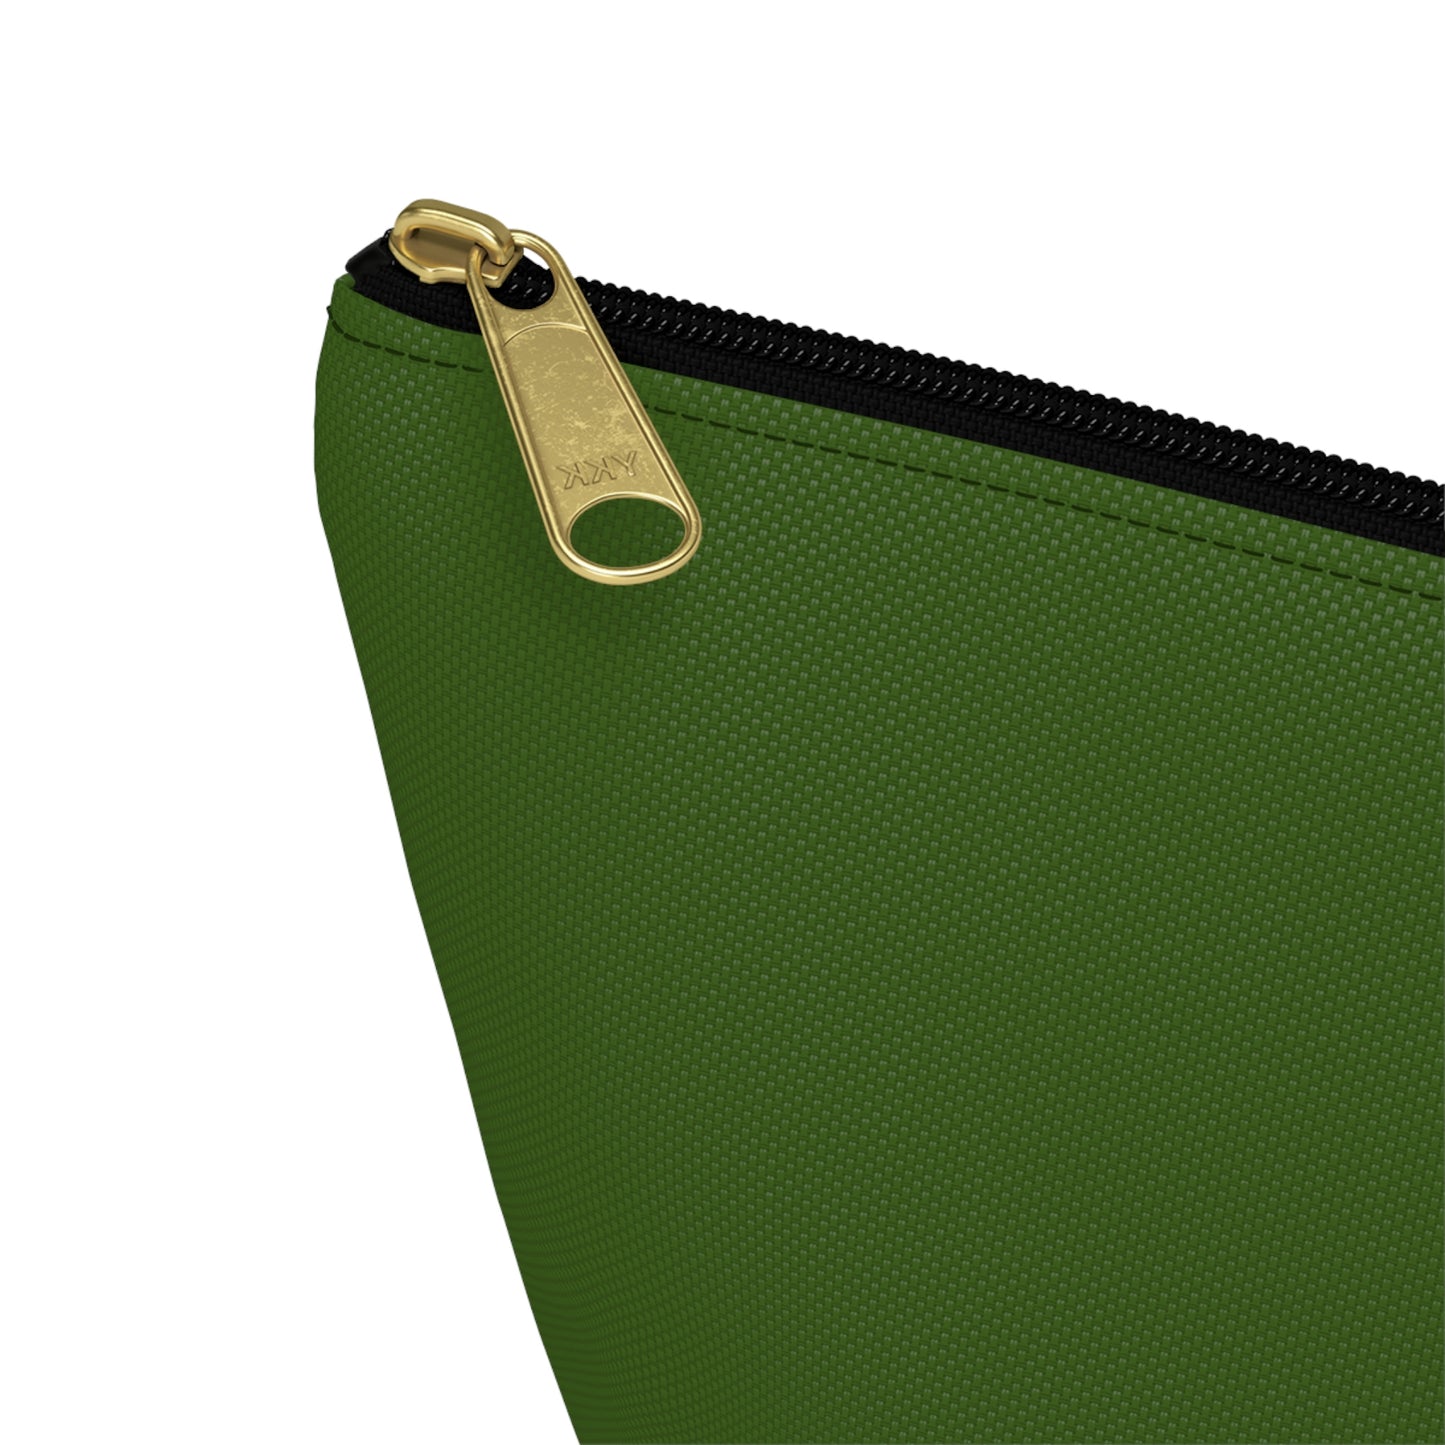 Accessories pouch | Customizable, Impactful, and upcycable